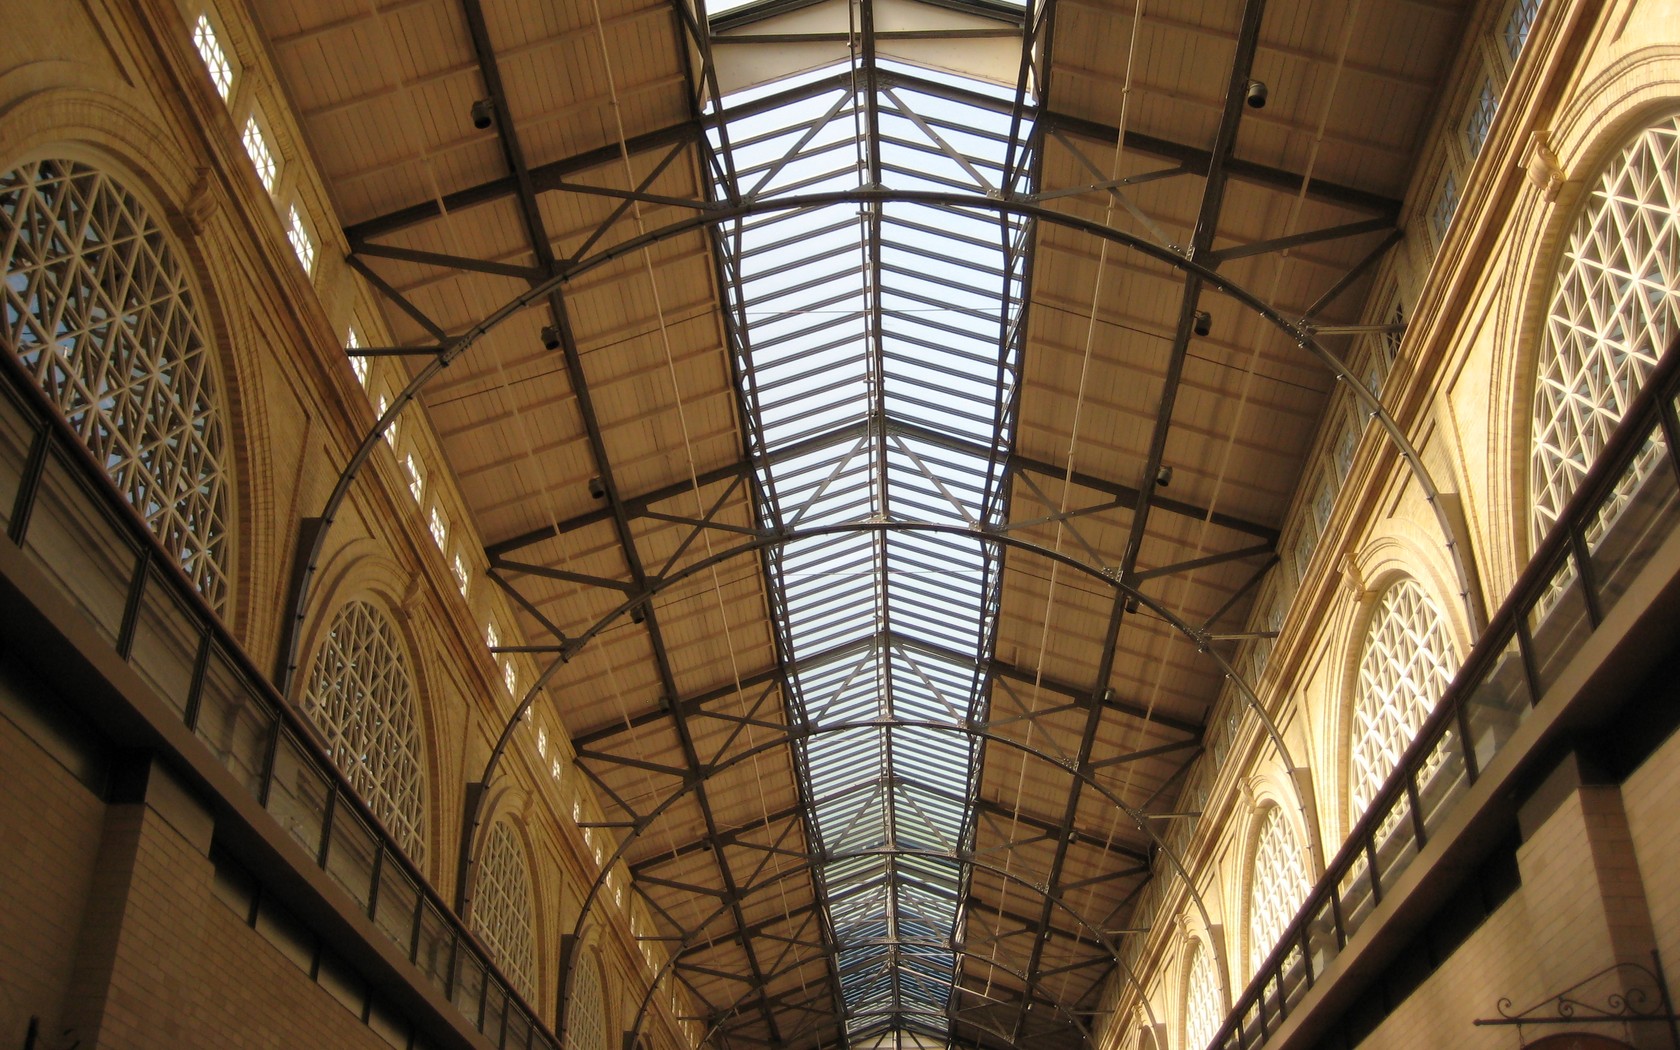 Download full size Ferry Building Ceiling Original wallpaper / 1680x1050